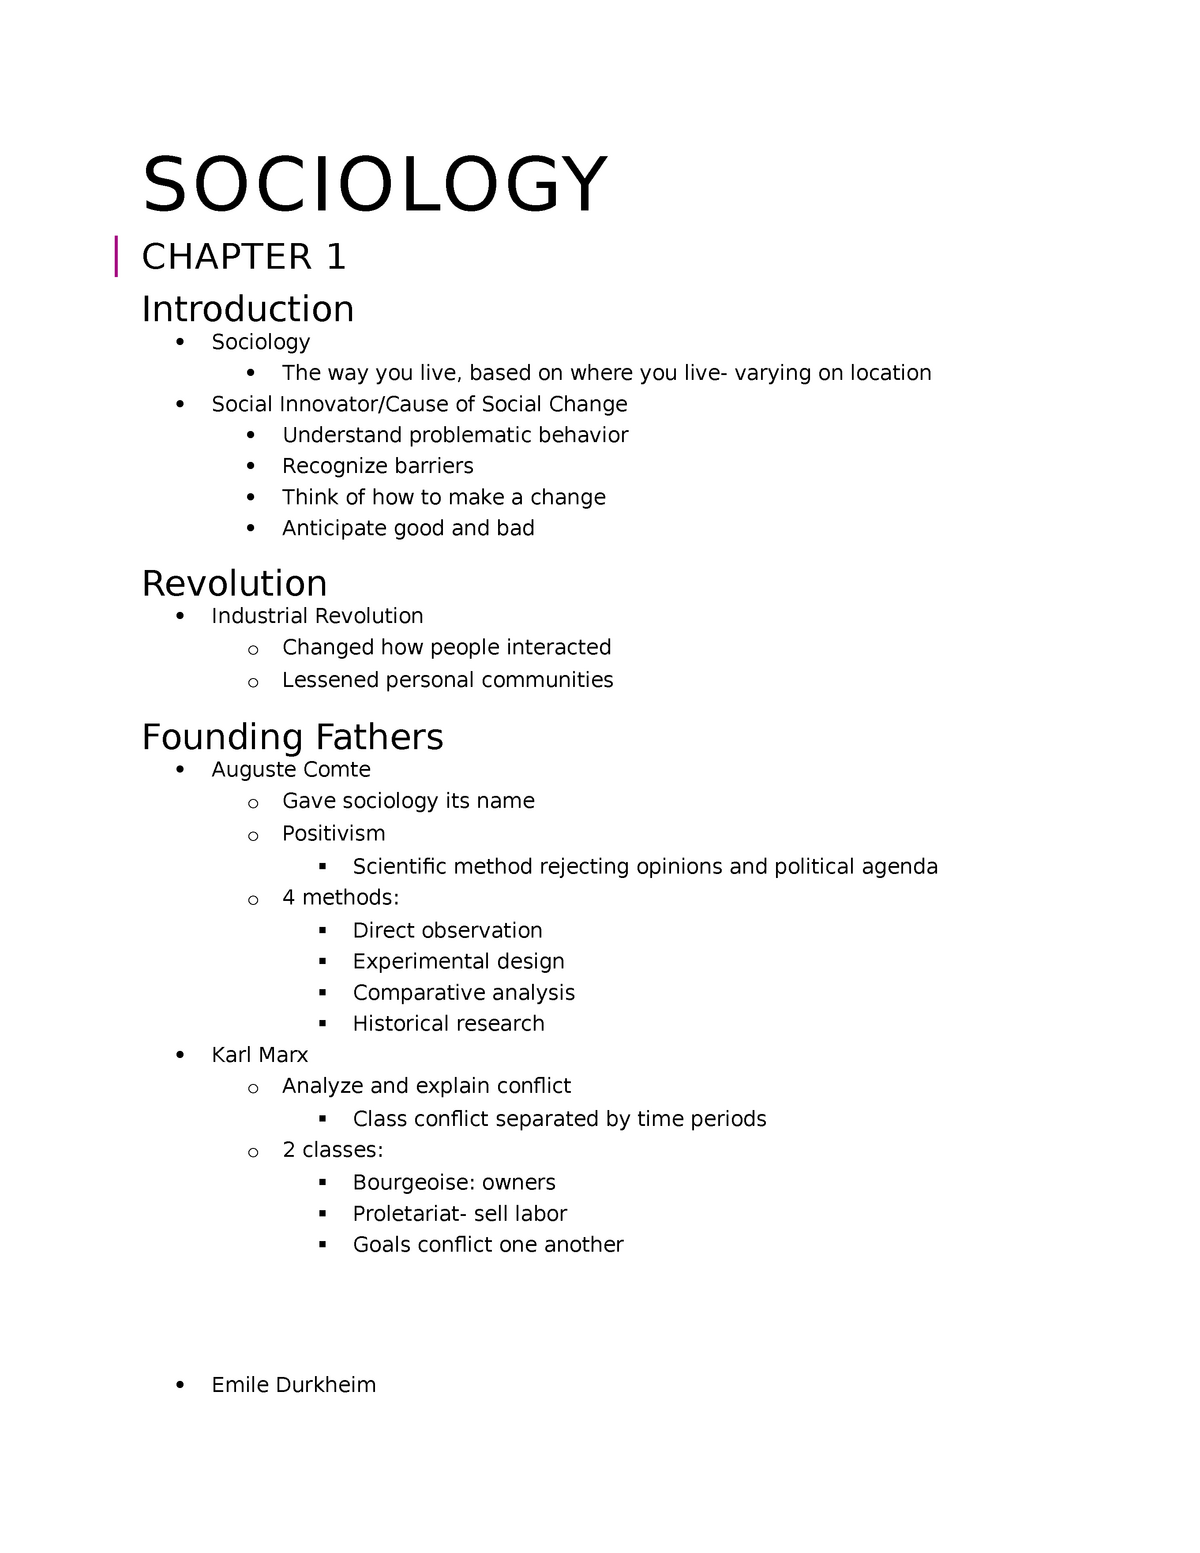 essay topic related to sociology